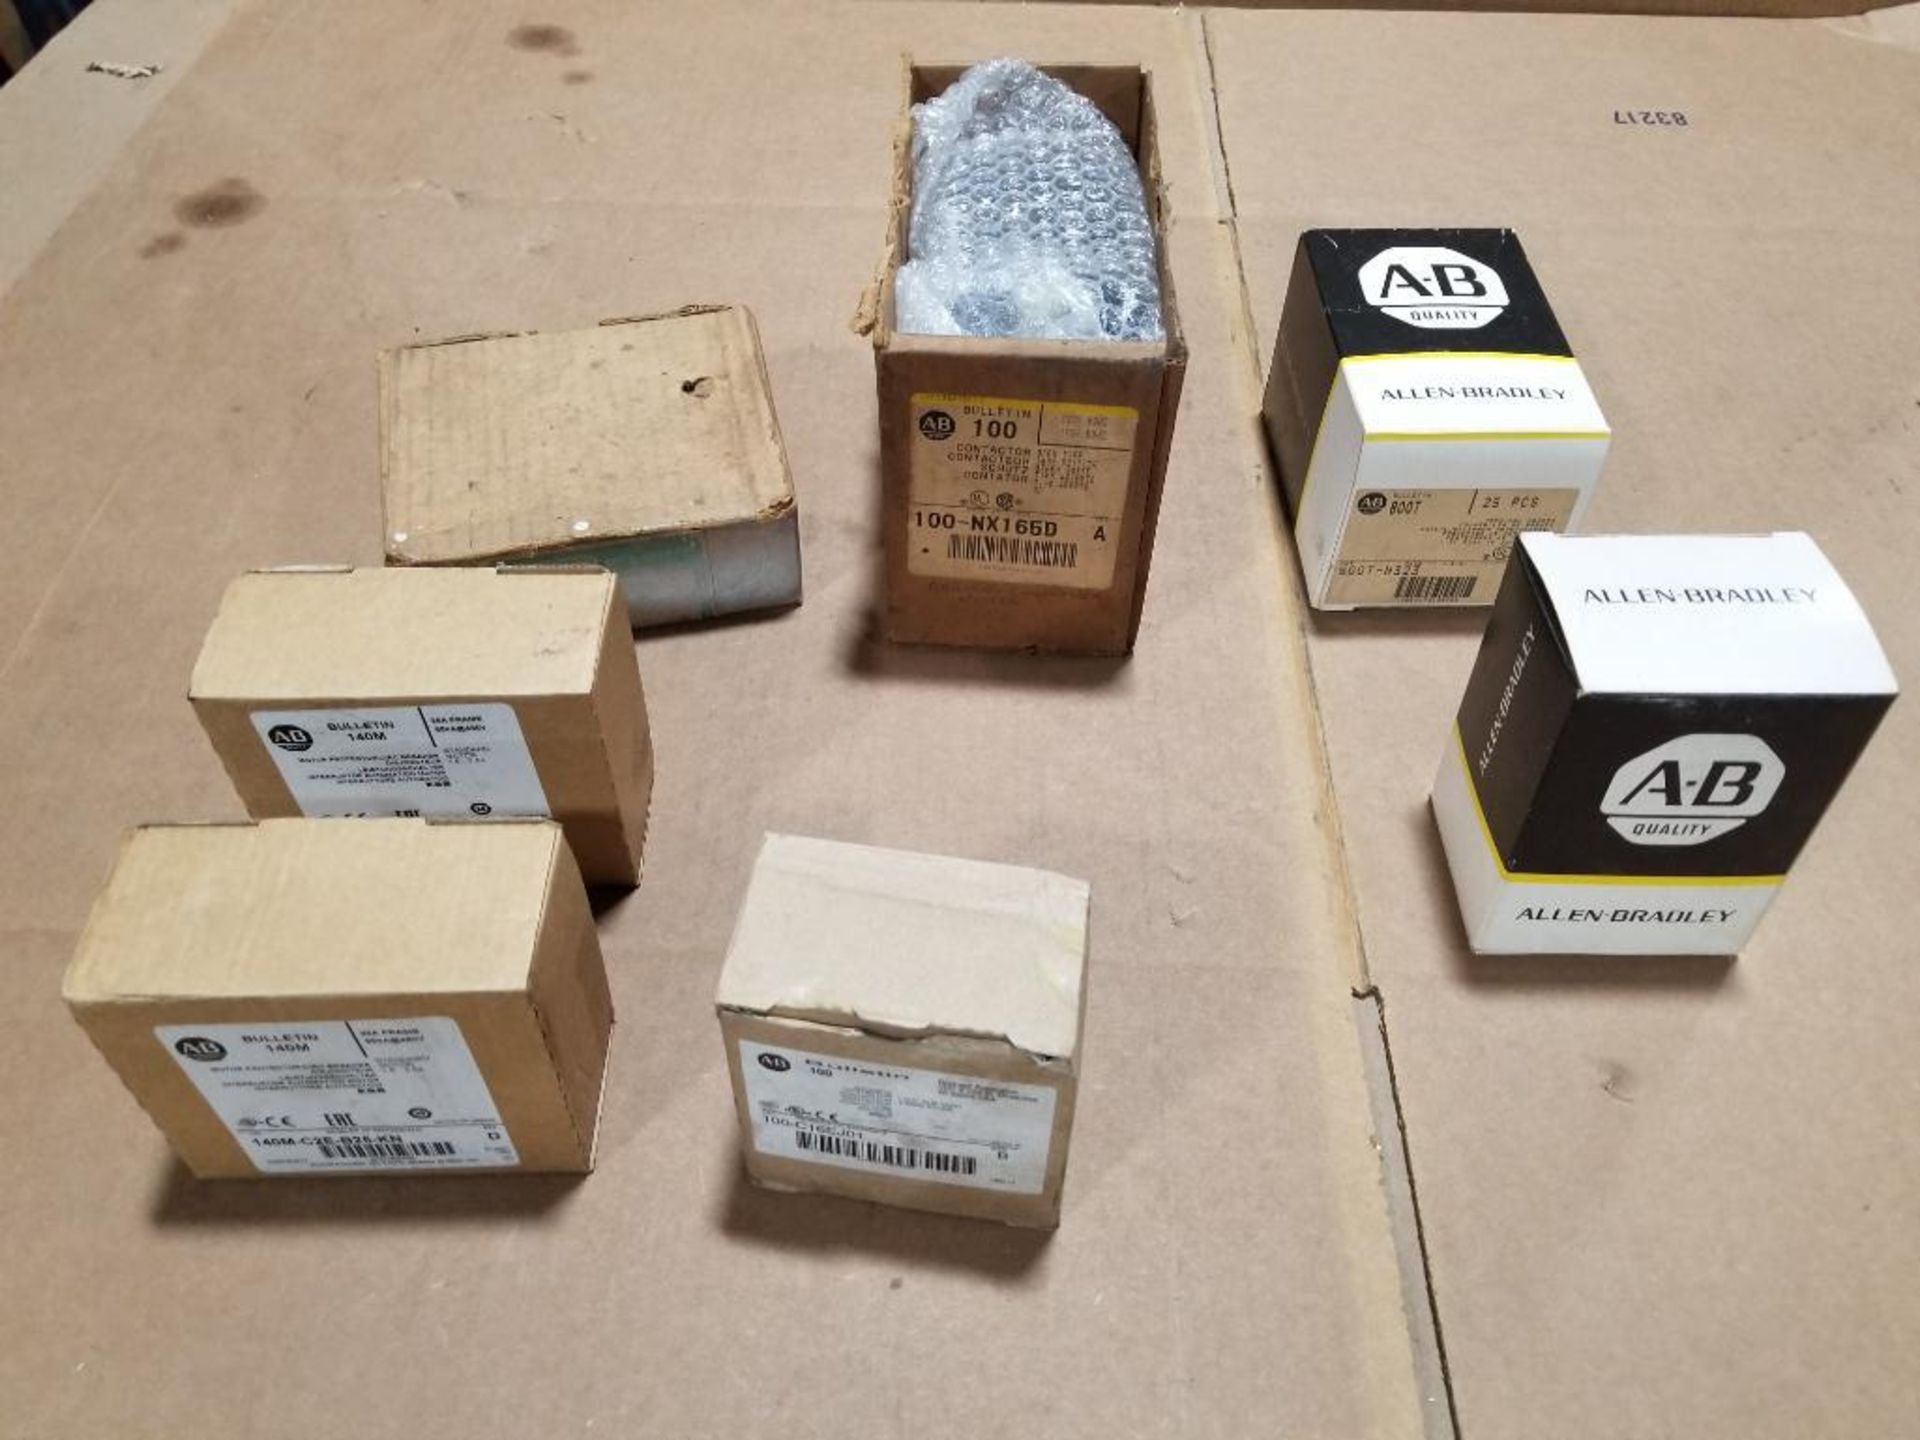 Qty 7 - Assorted Allen Bradley electrical parts. New in box.